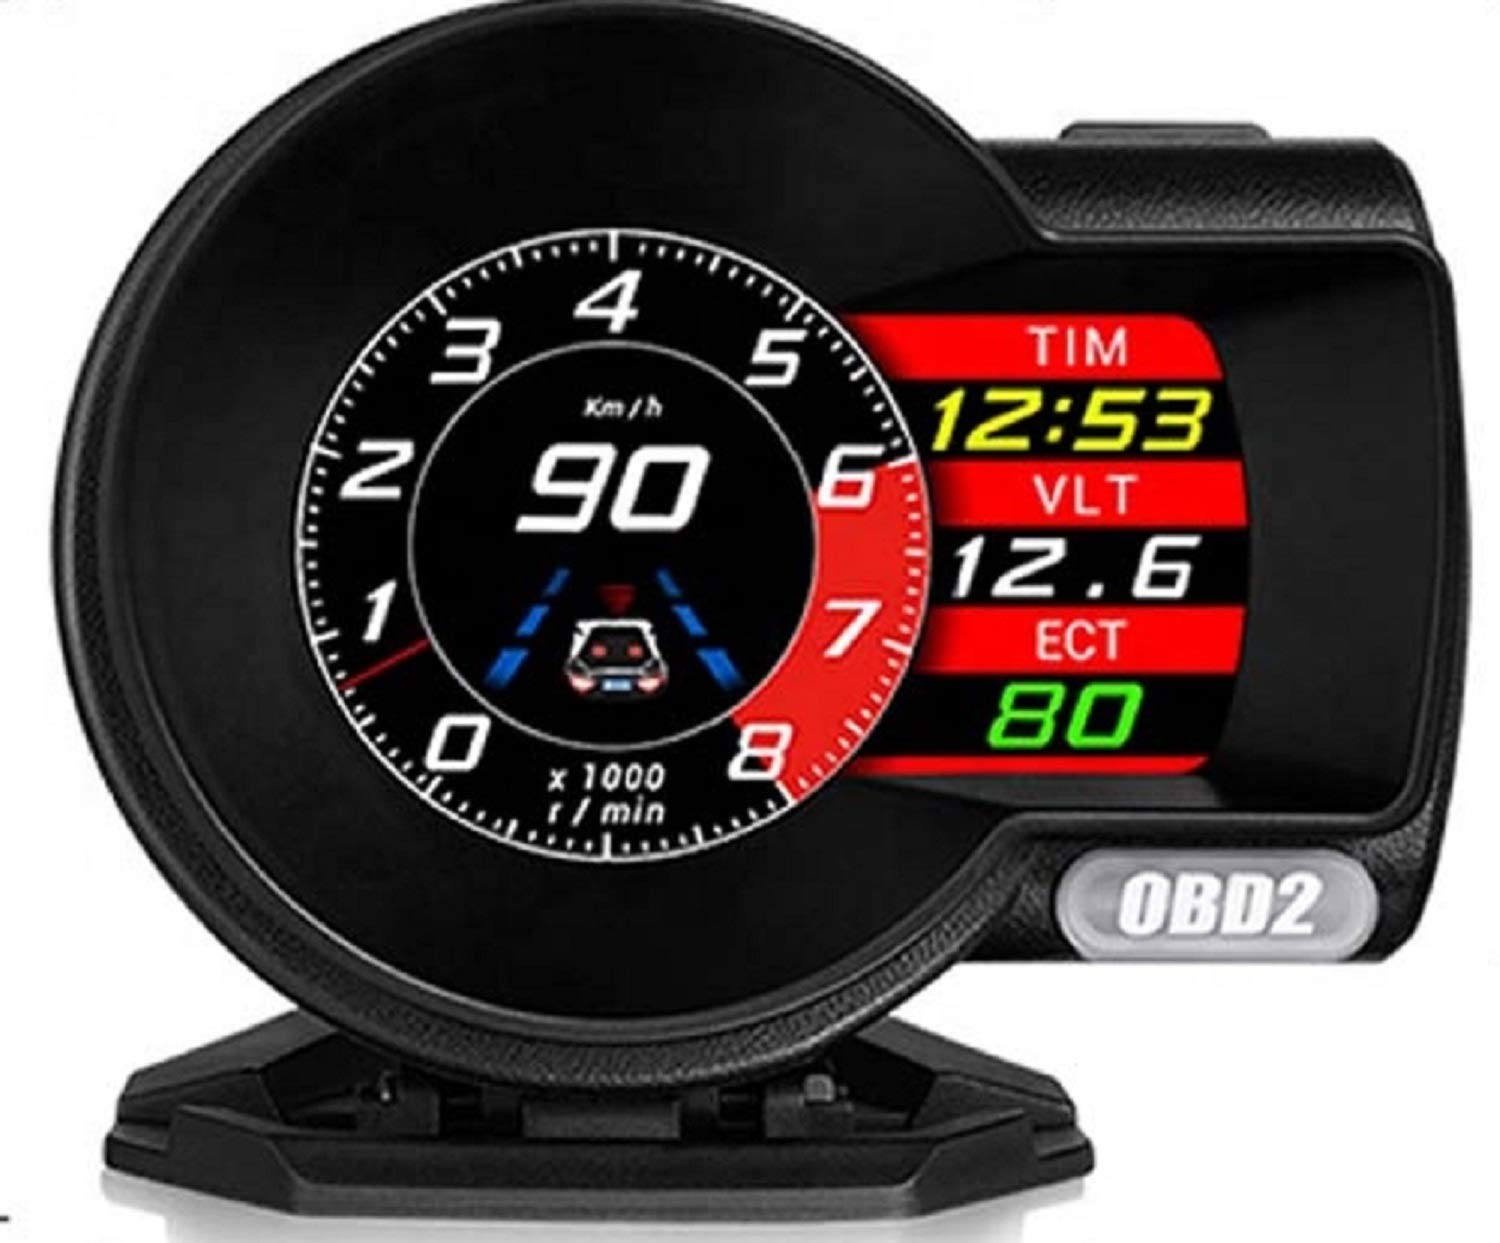 Lion Power Performance Universal Head Up Display (HUD) with Digital Multi Function and Multi Alarm Setting Include Brake Test and More, Made in USA